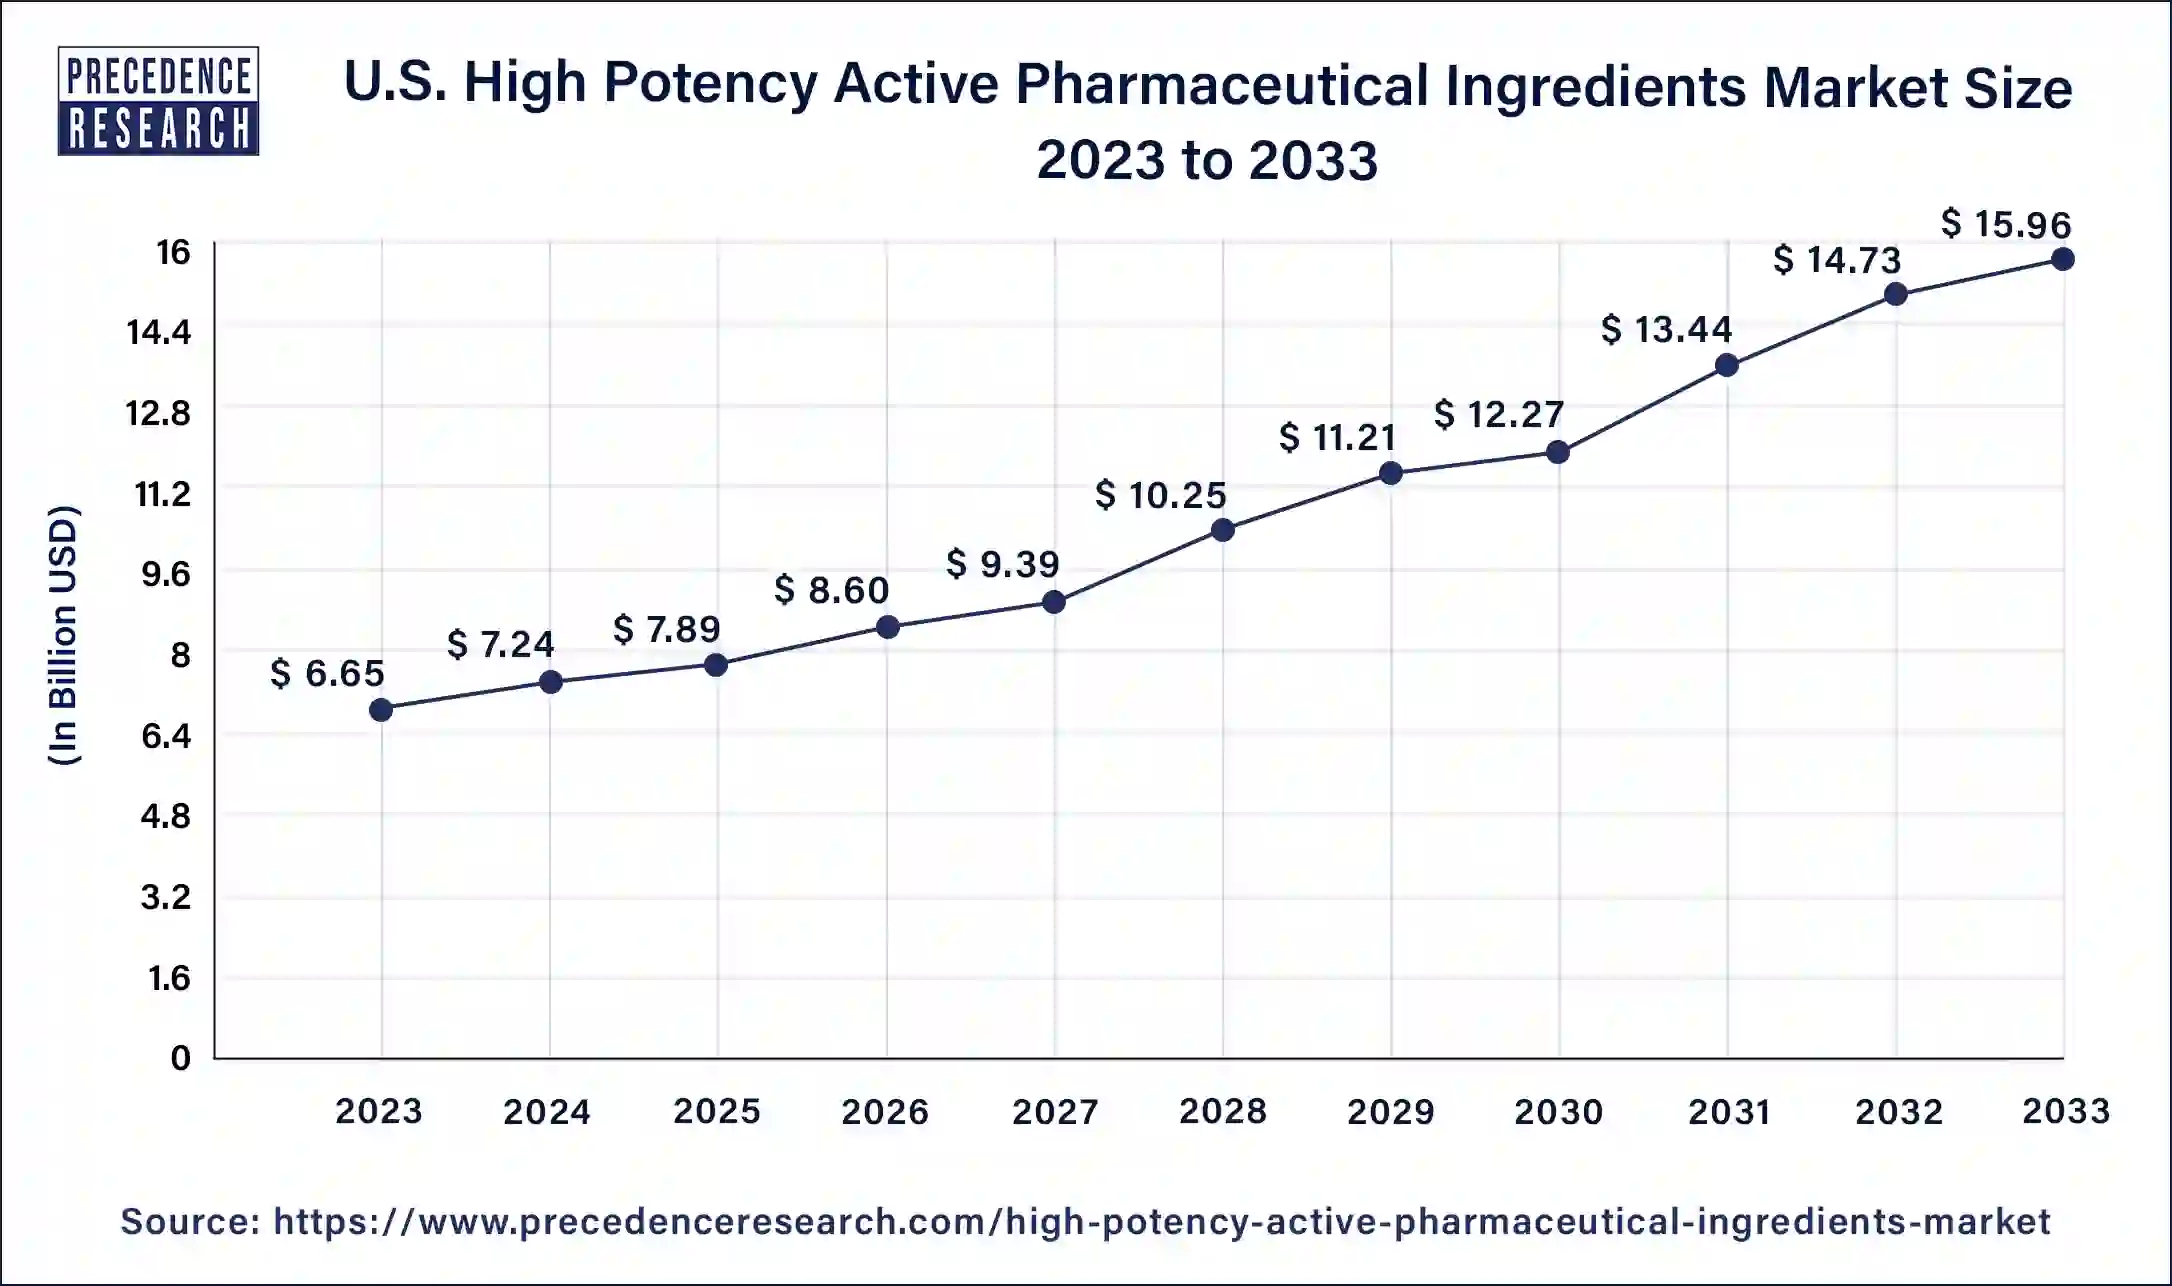 U.S. High Potency Active Pharmaceutical Ingredients Market Size 2024 to 2033